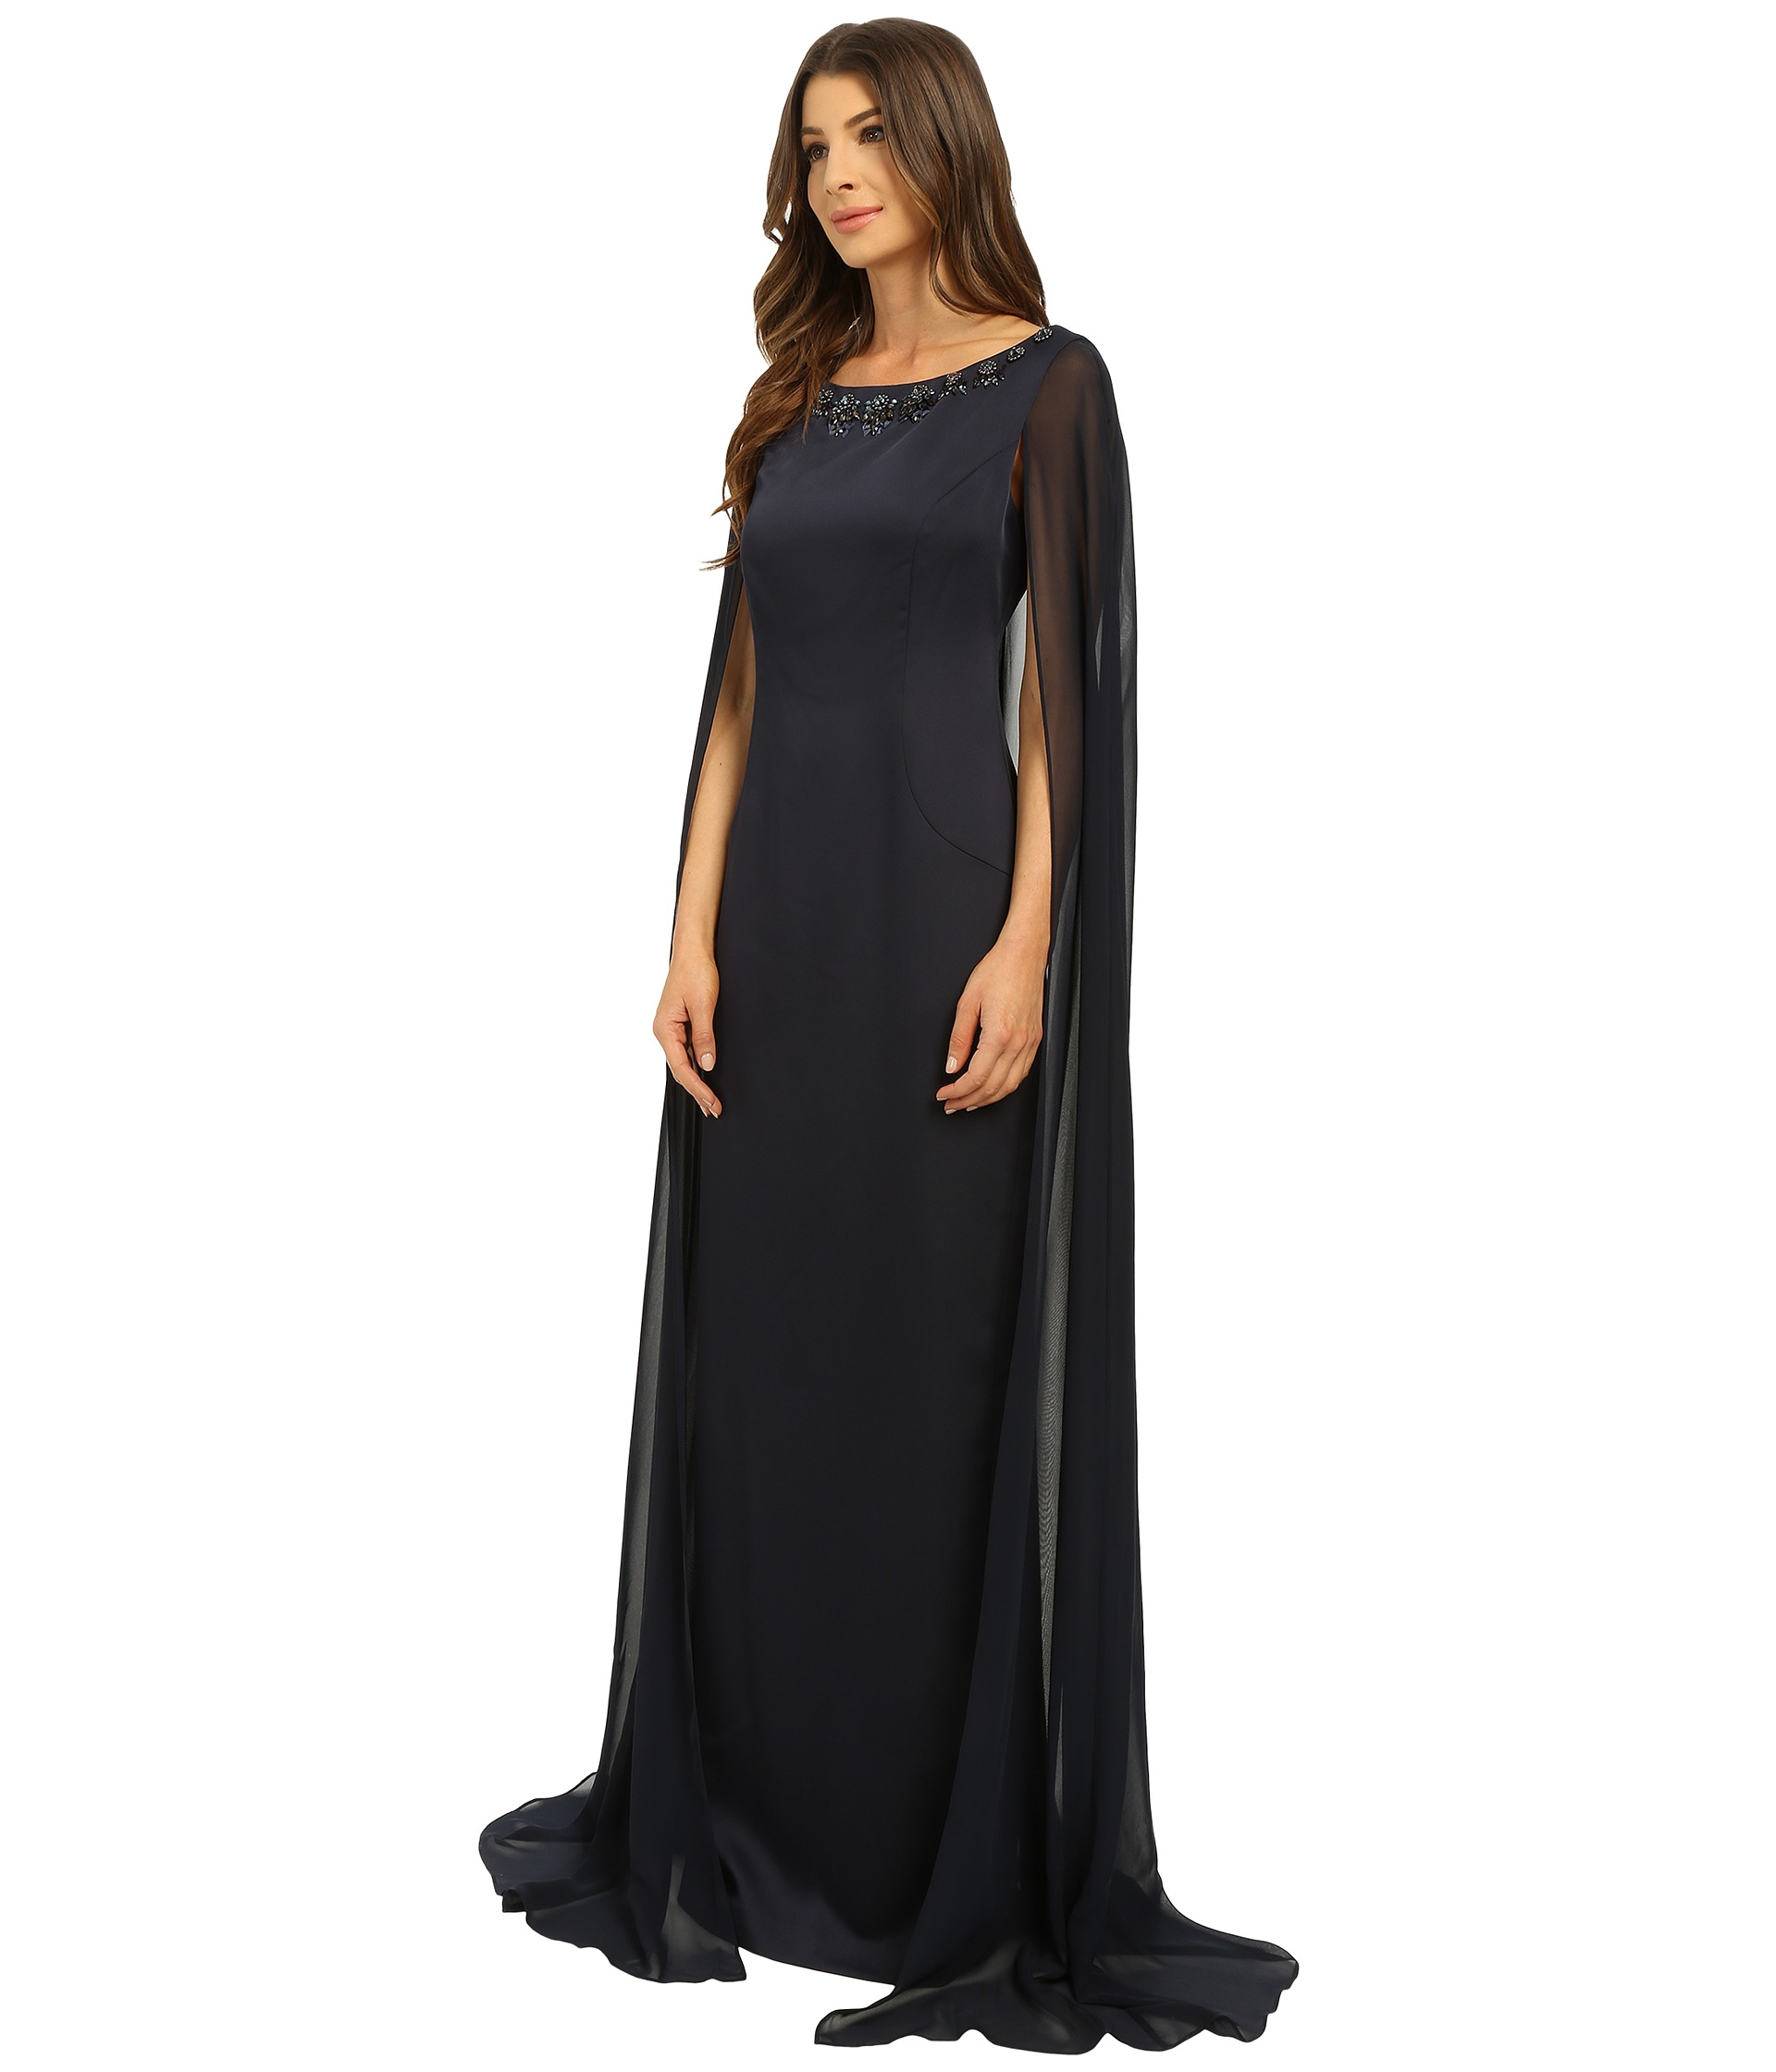 Adrianna Papell Cape Dress With Neck Beading in Black | Lyst